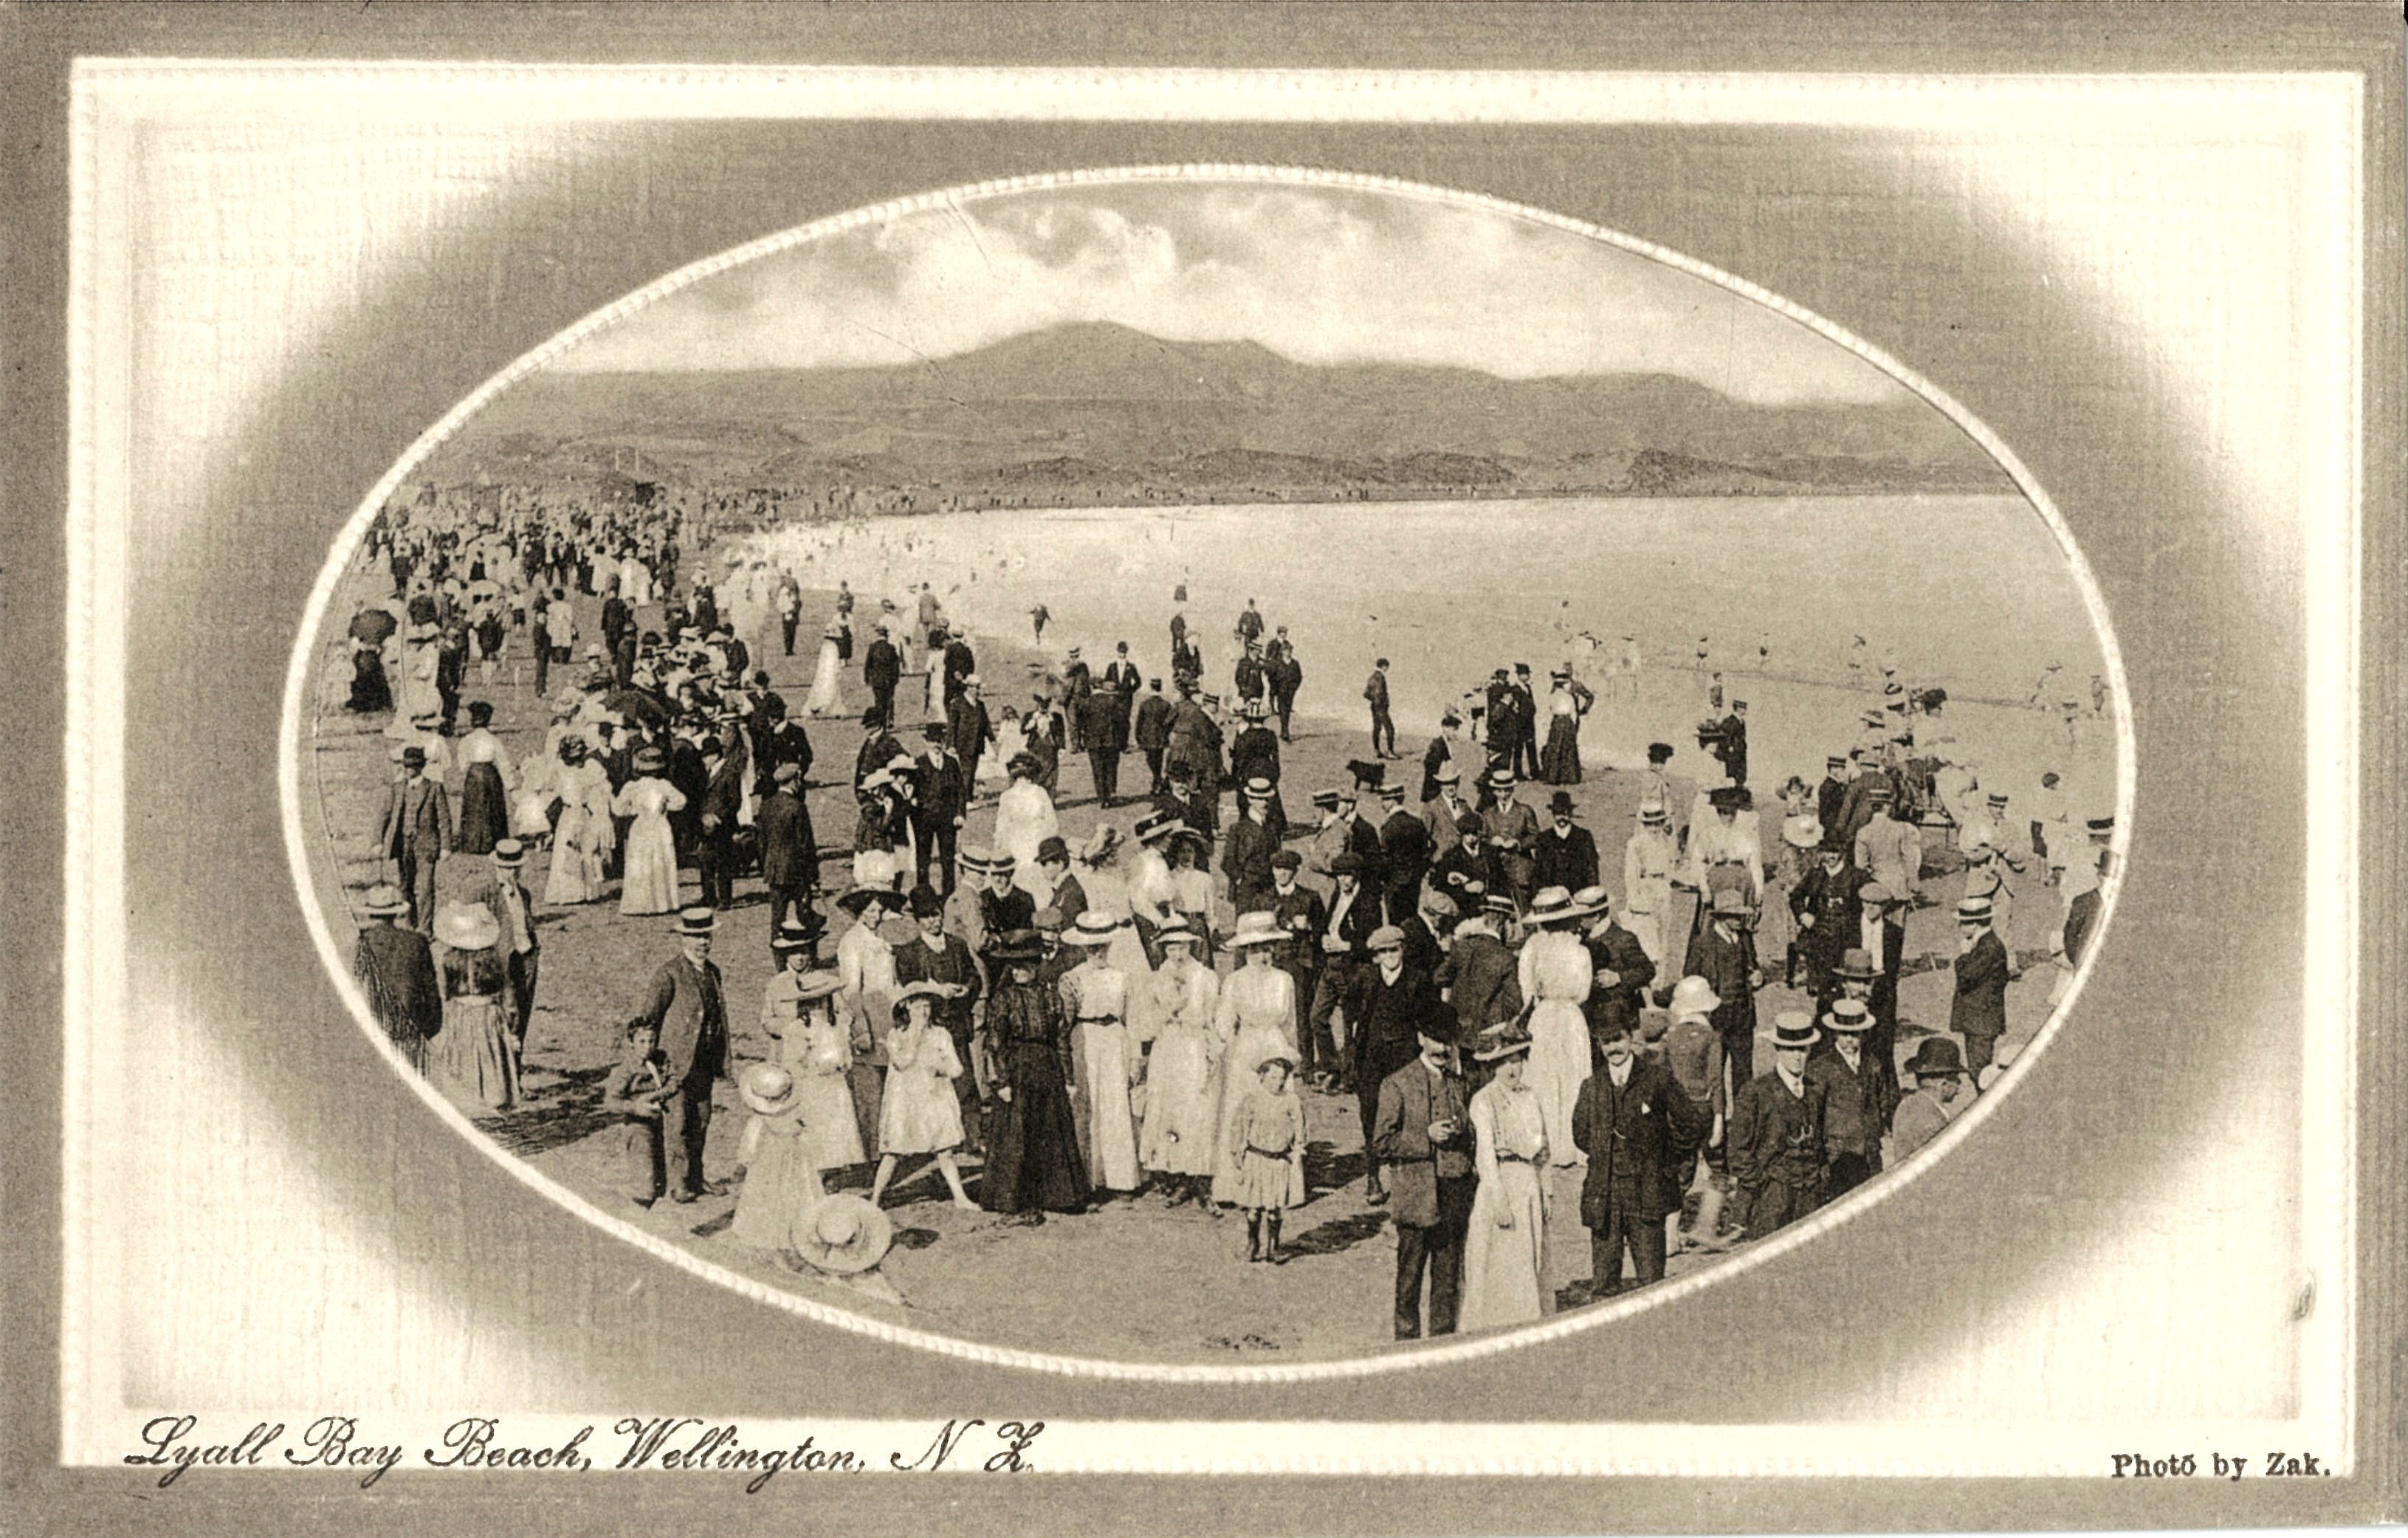 Post card of crowds gathering on Lyall Bay beach